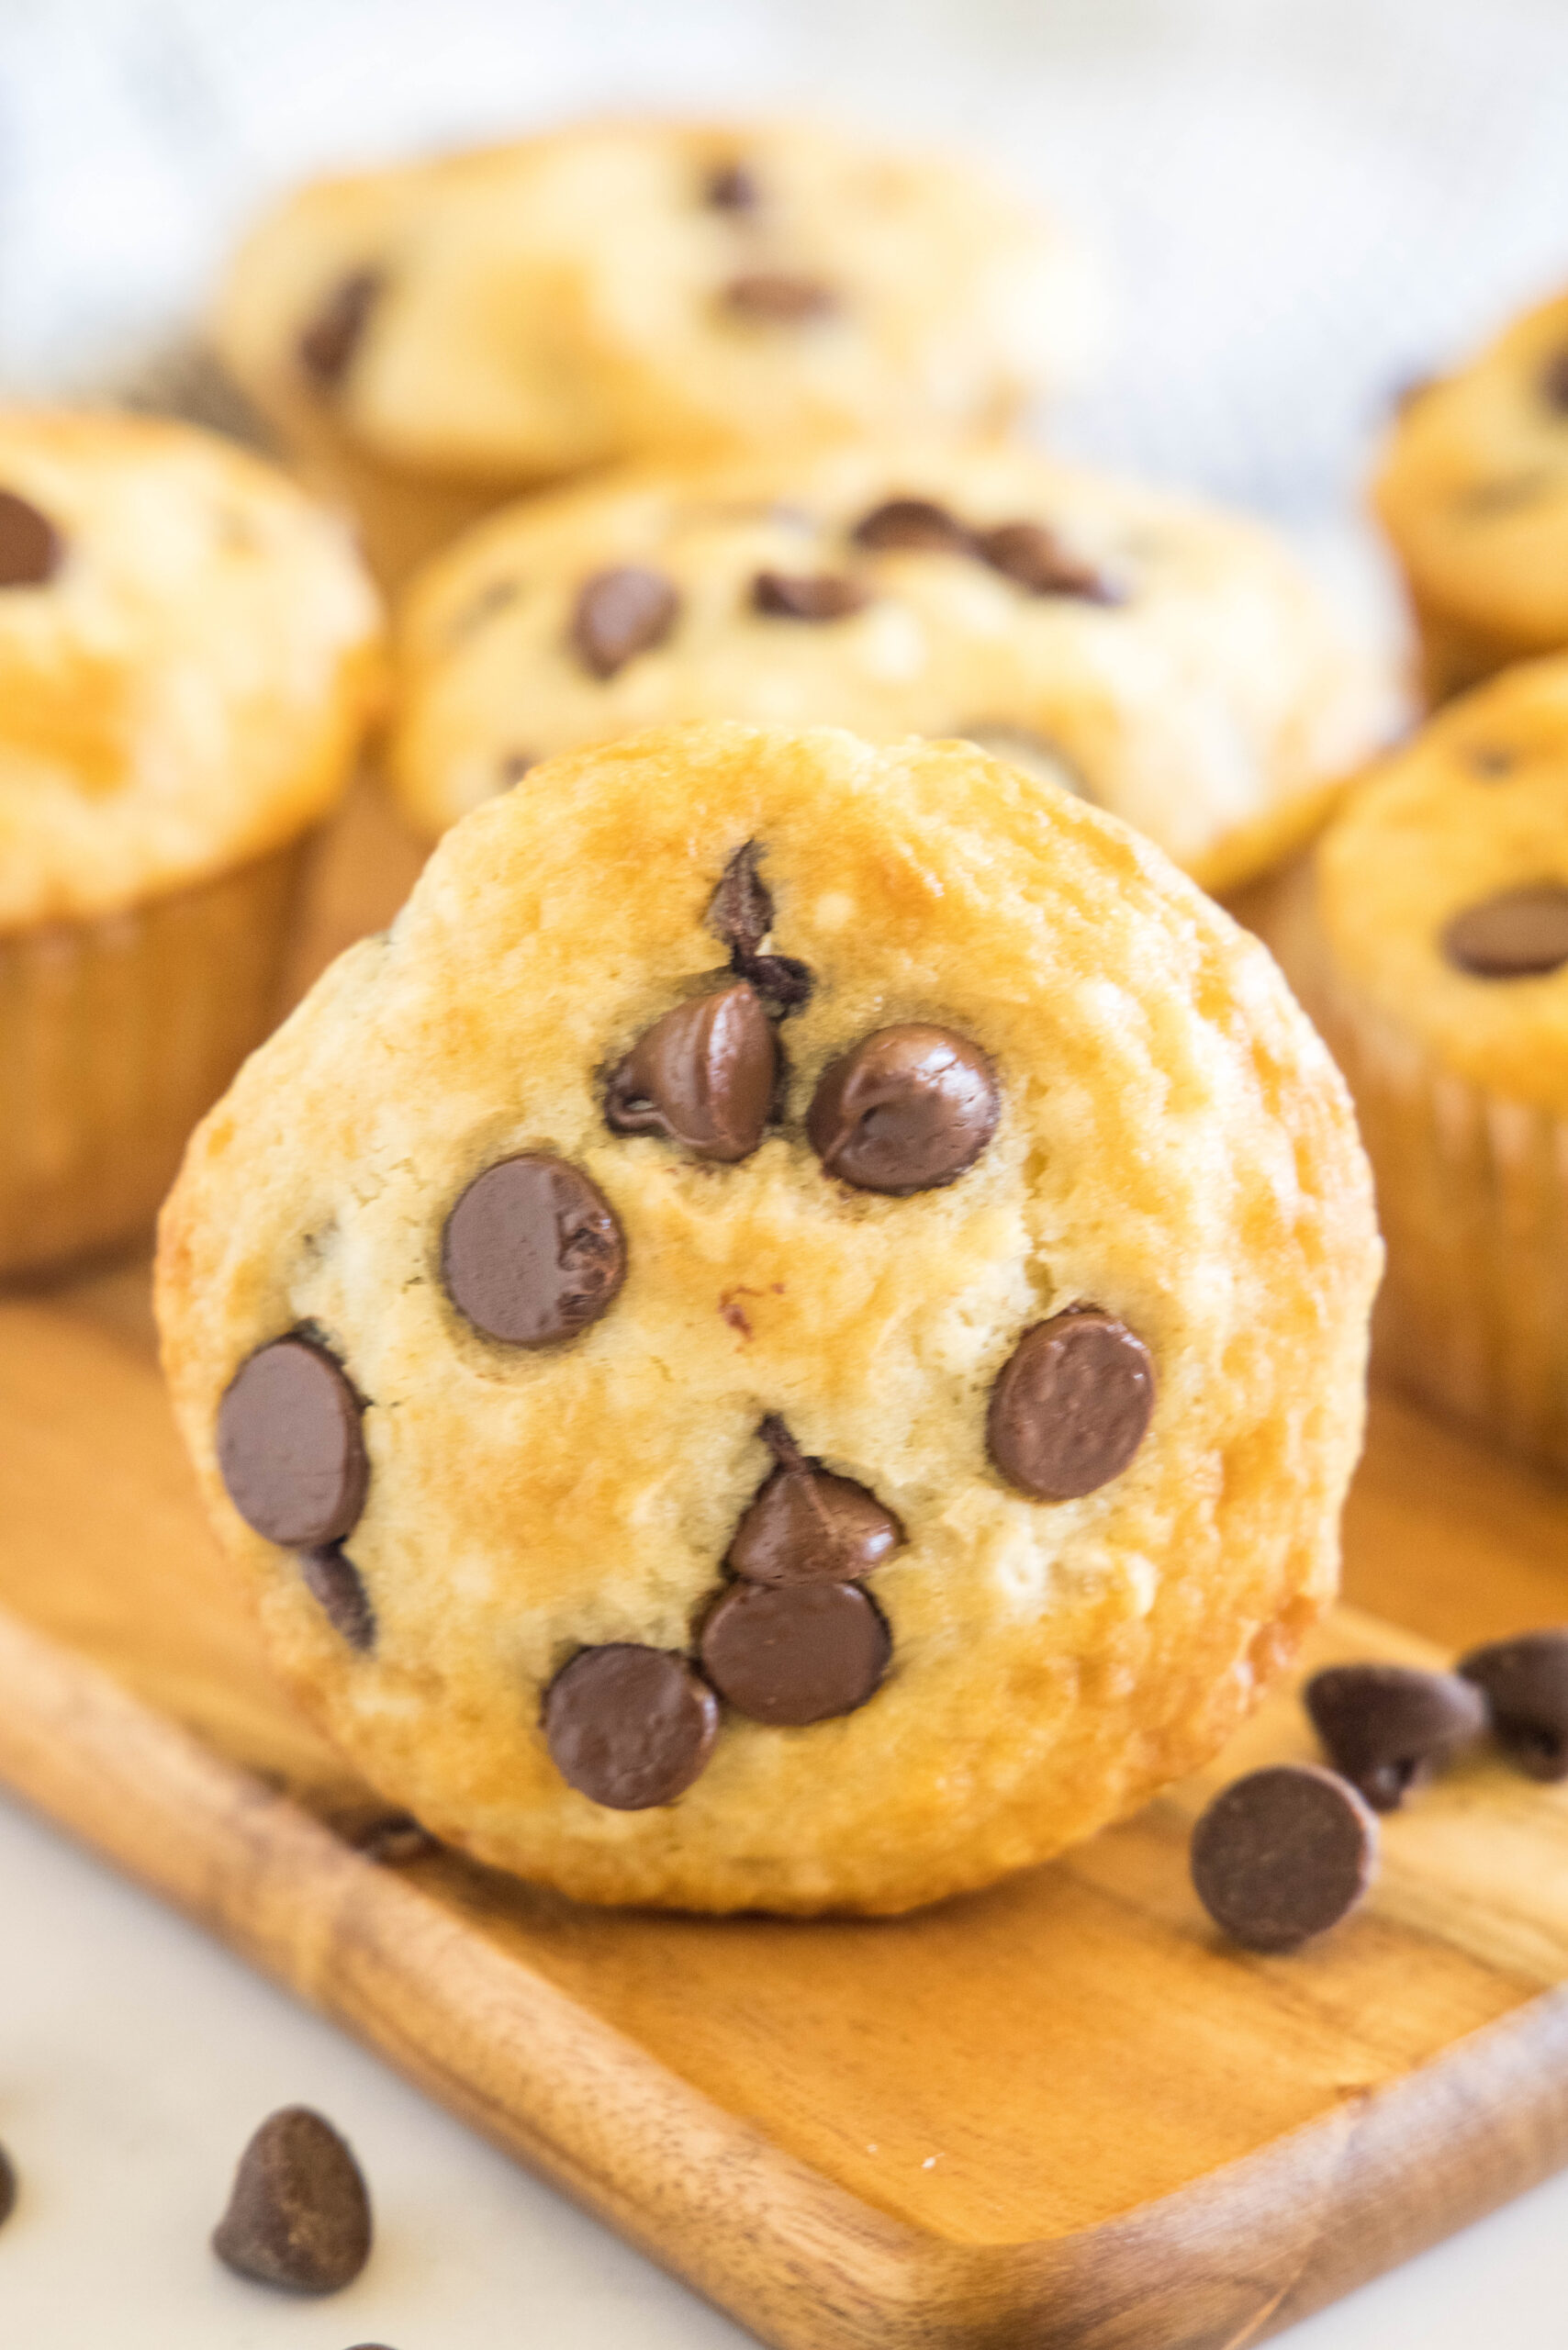 Close up of a chocolate chip buttermilk muffin on a wooden platter, with more muffins in the background.